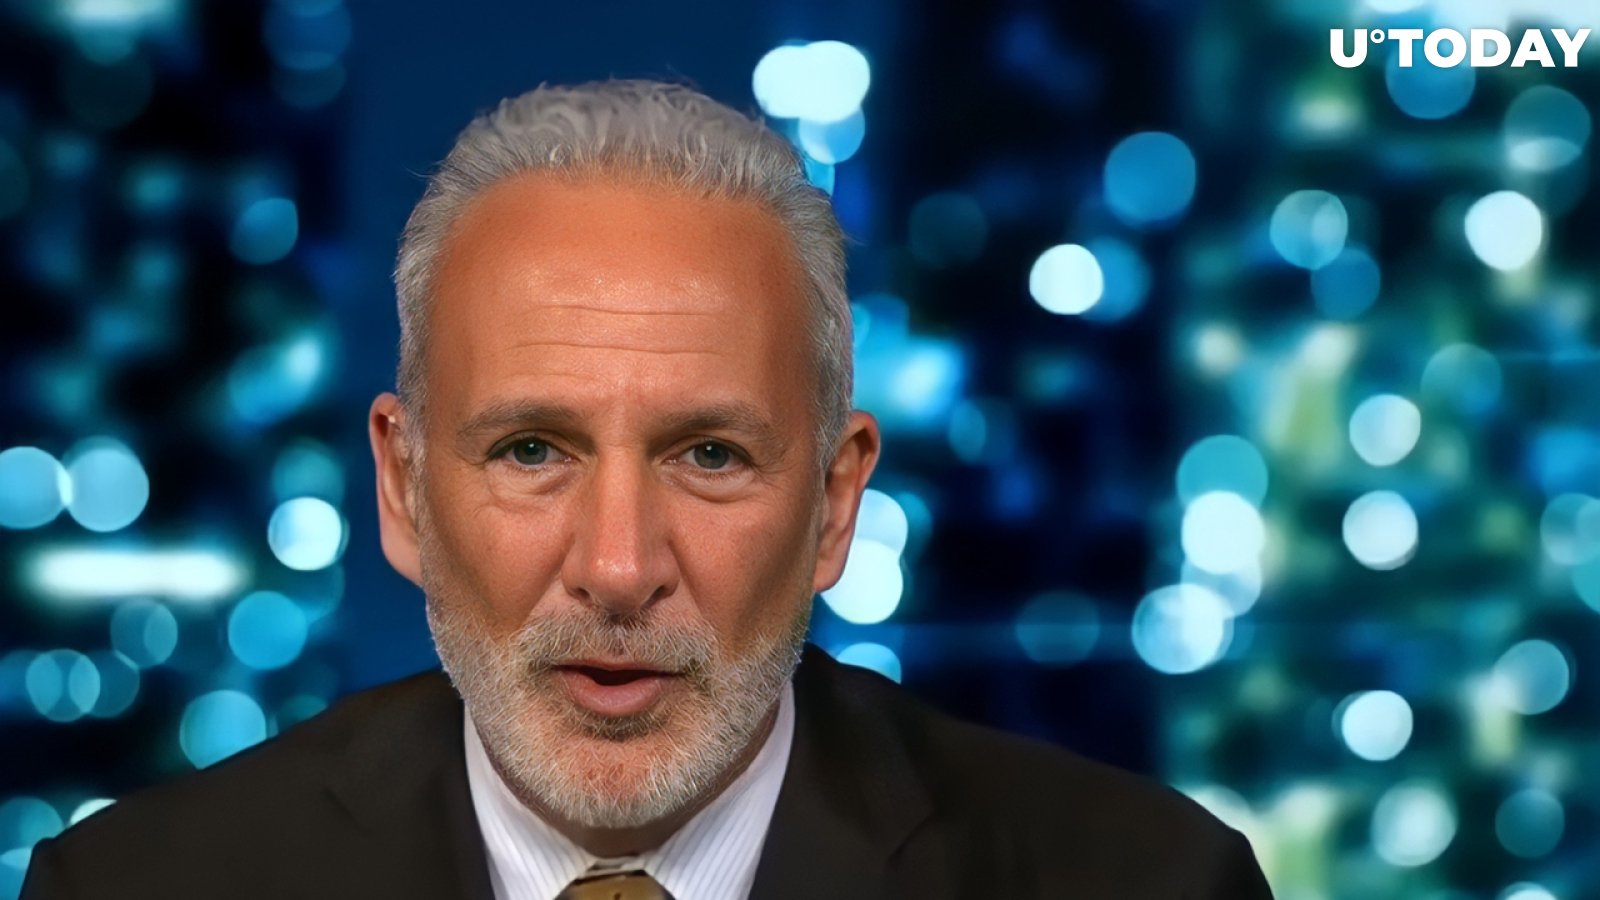 Peter Schiff Agrees with Michael Saylor That Bitcoin Is on Sale, But There's a Catch